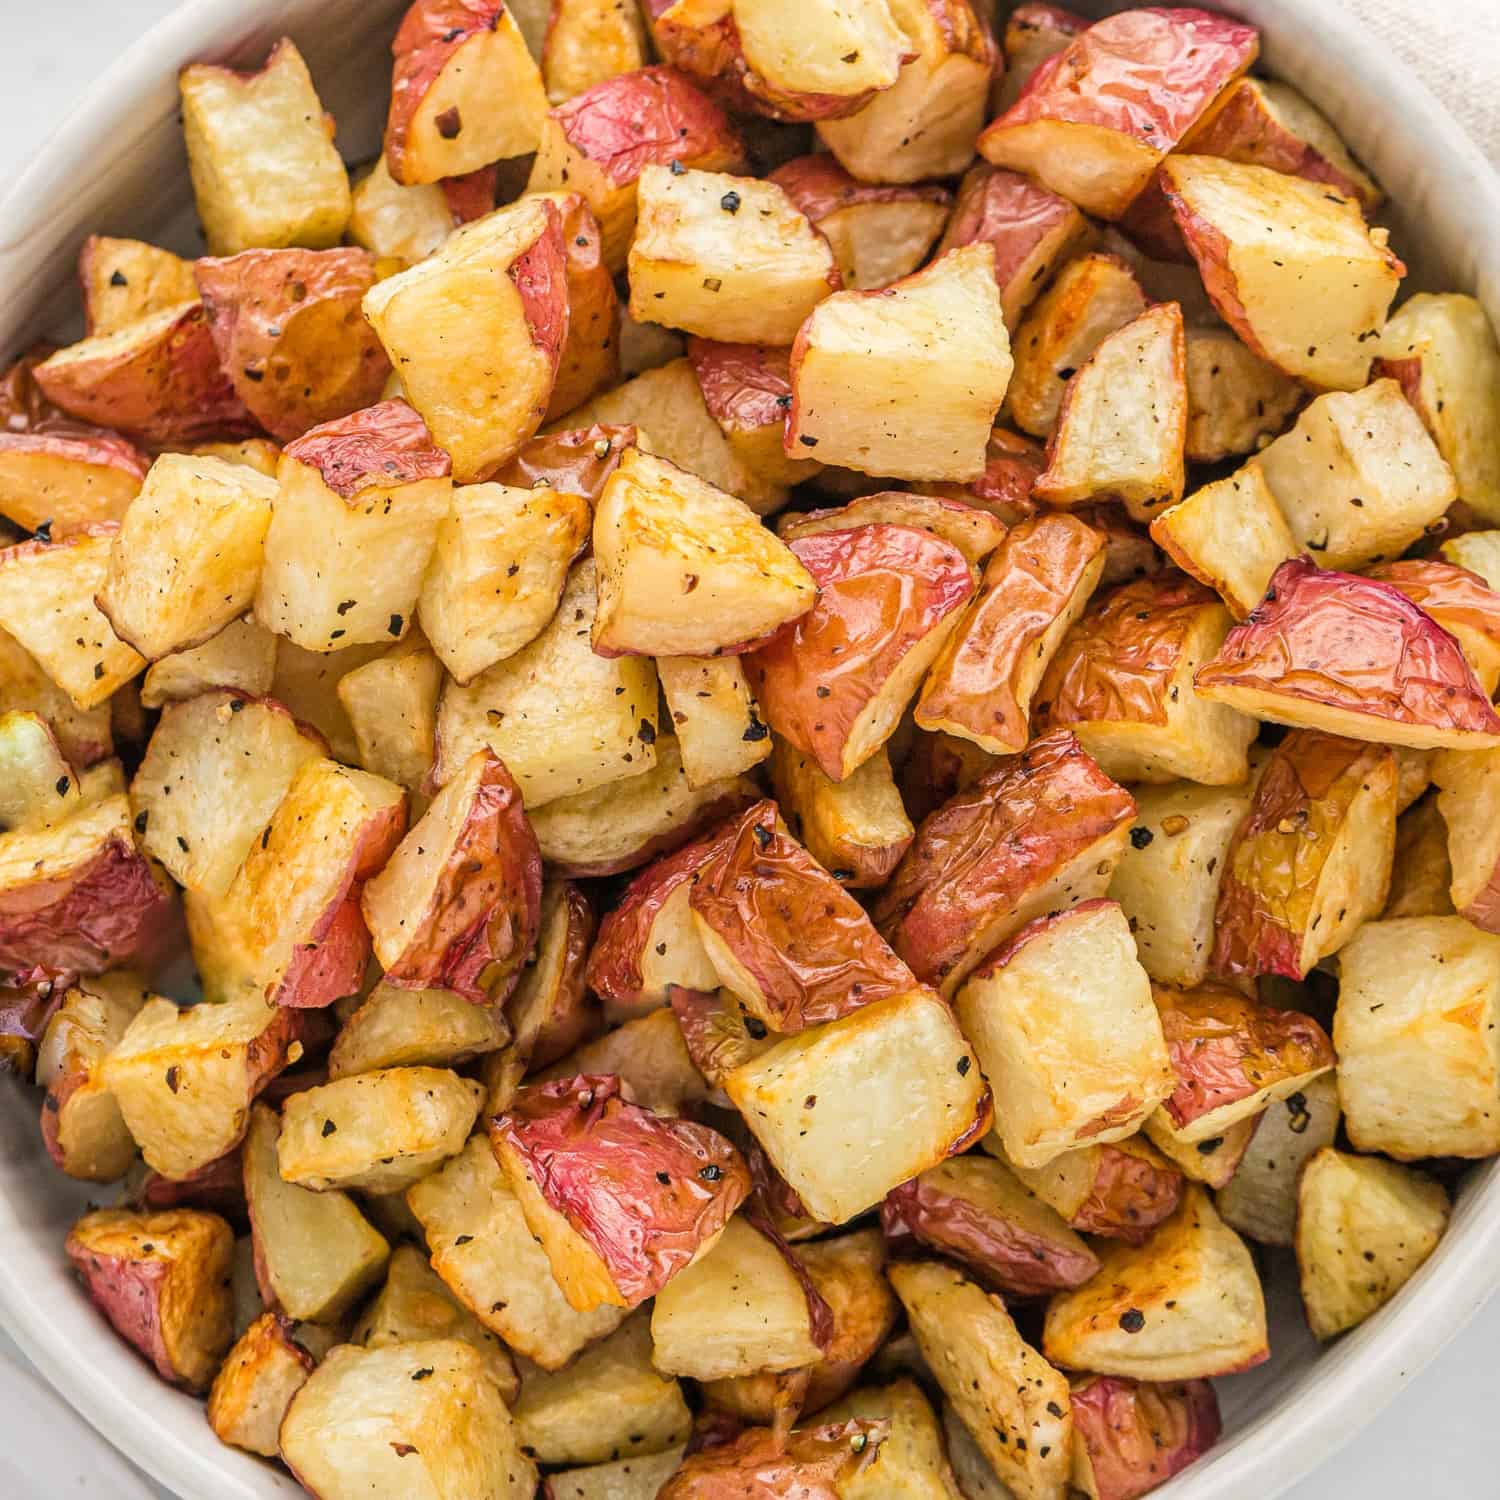 Russet Potatoes  With all the traditional flavors, ingredients, and foods  they love.